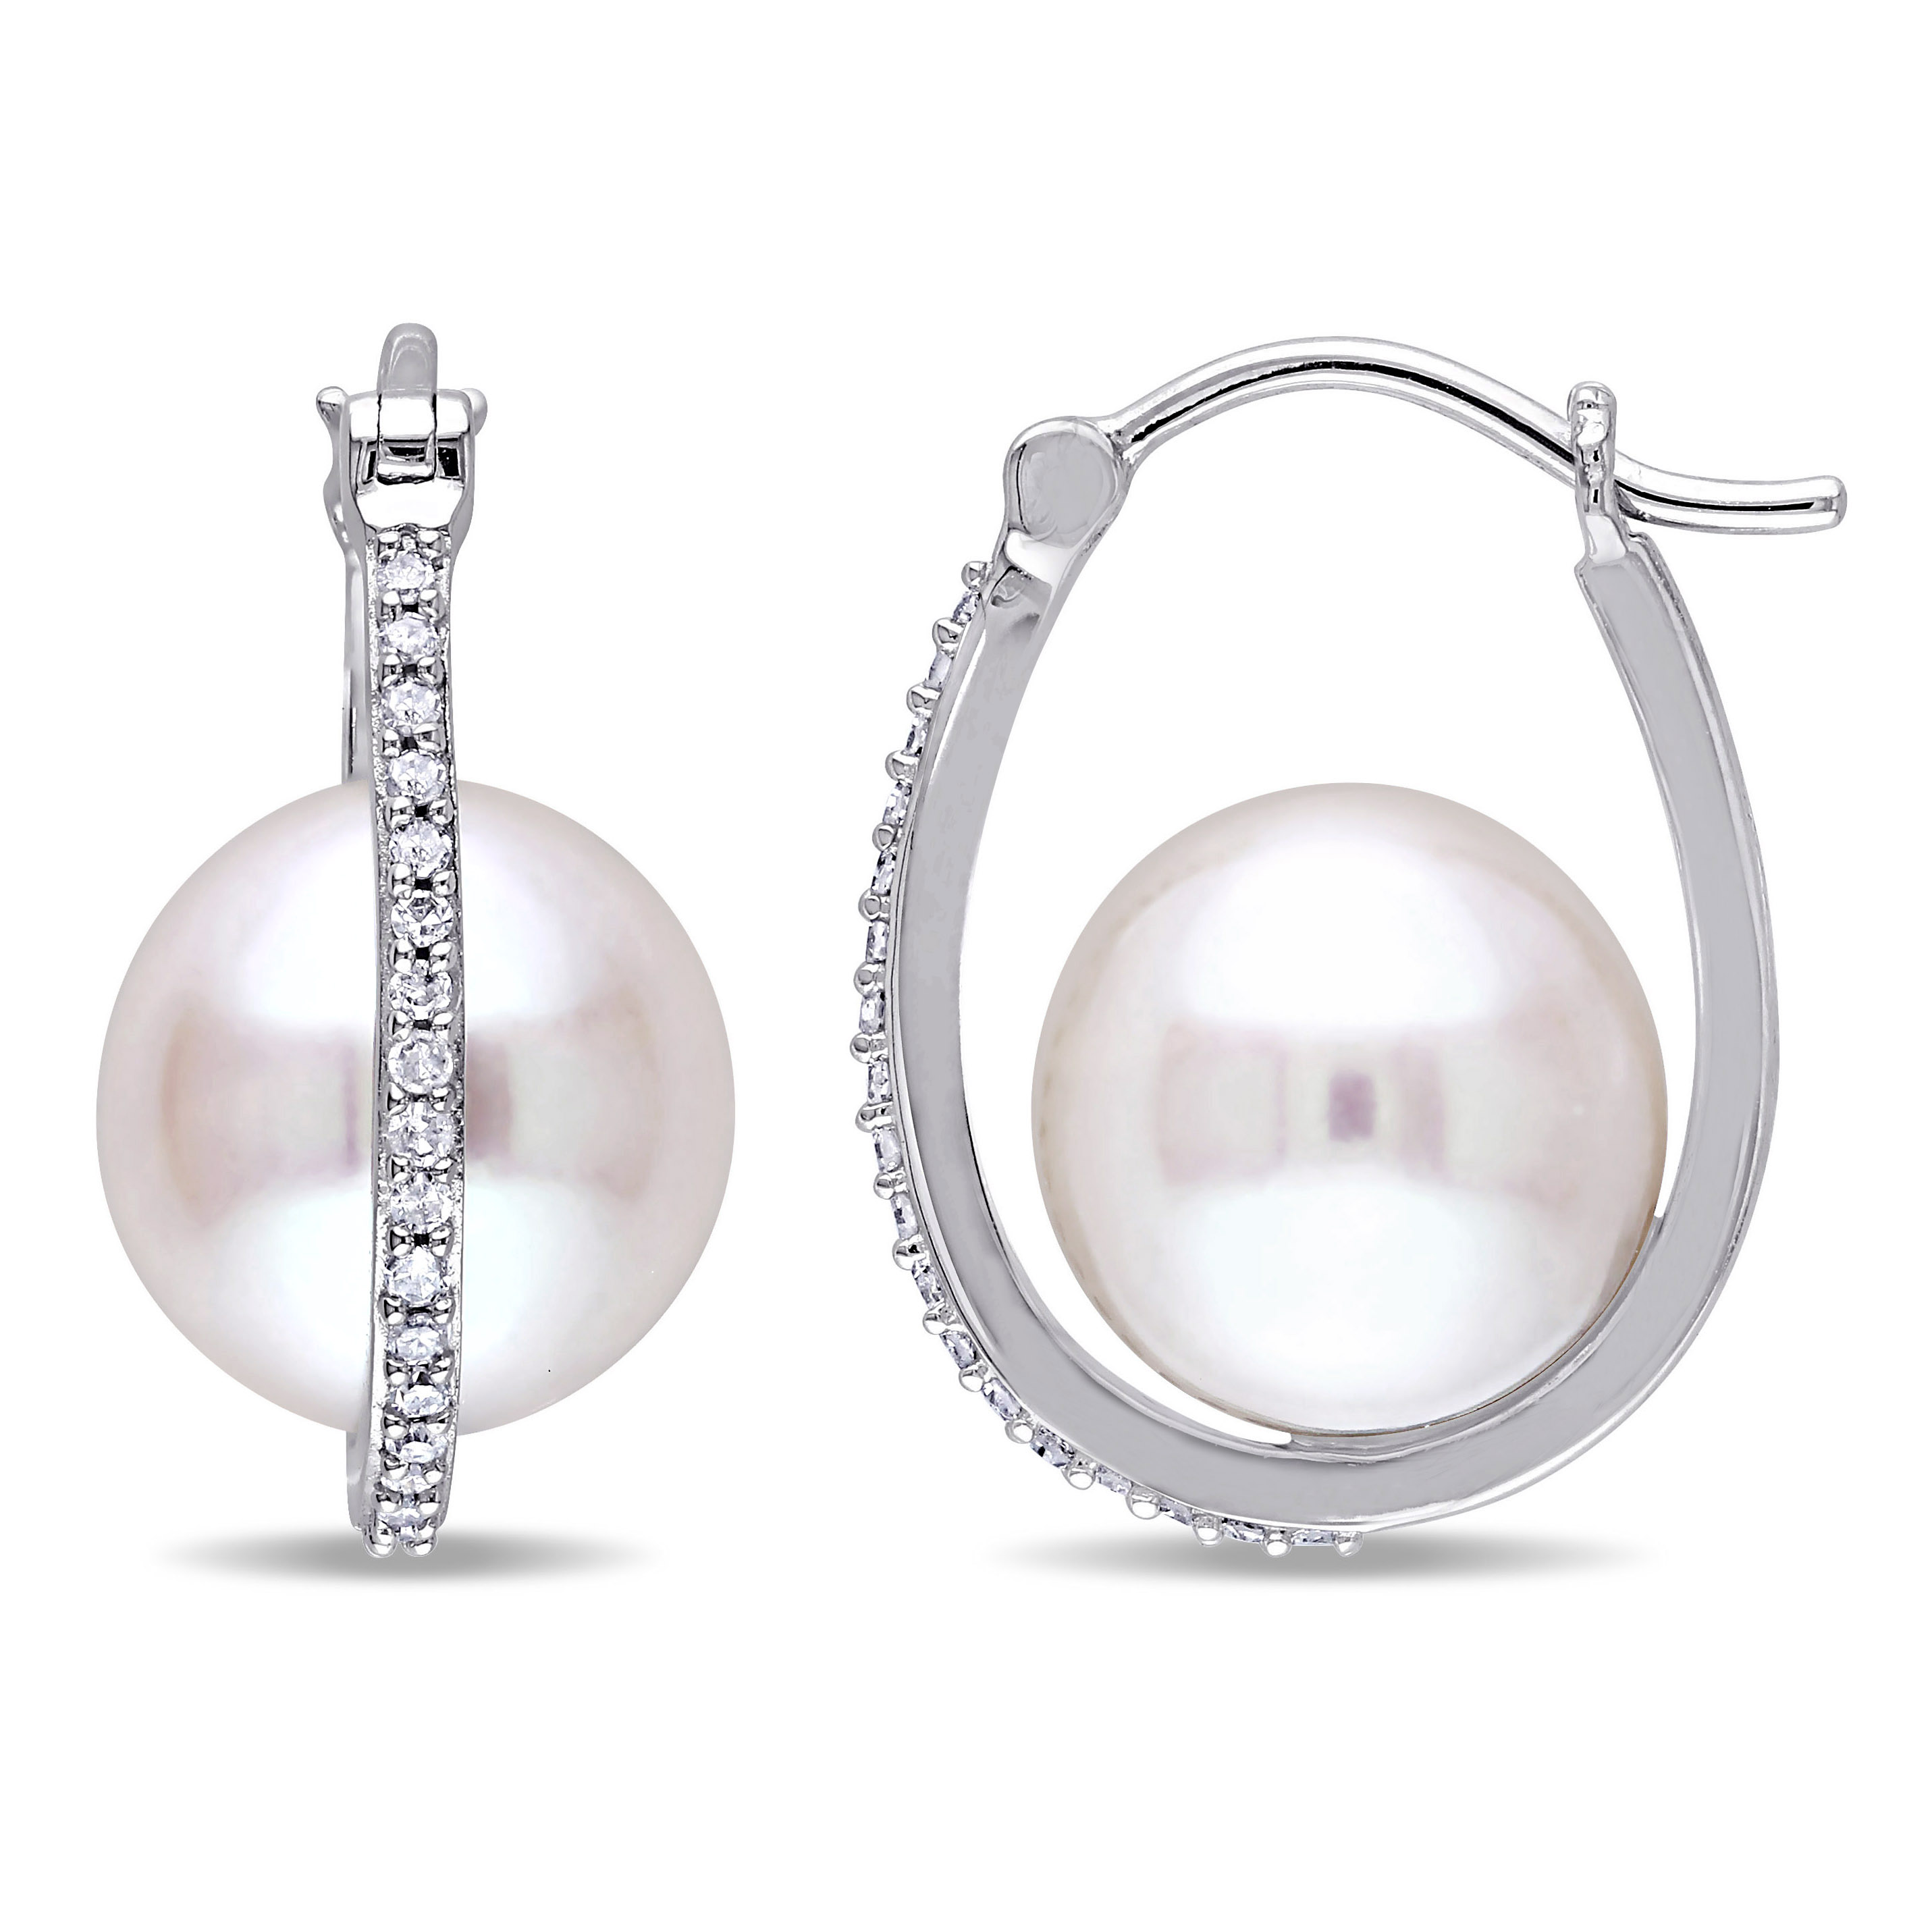 9.5 - 10 MM Cultured Freshwater Pearl and 1/7 CT TW Diamond Hoop Earrings in 10k White Gold